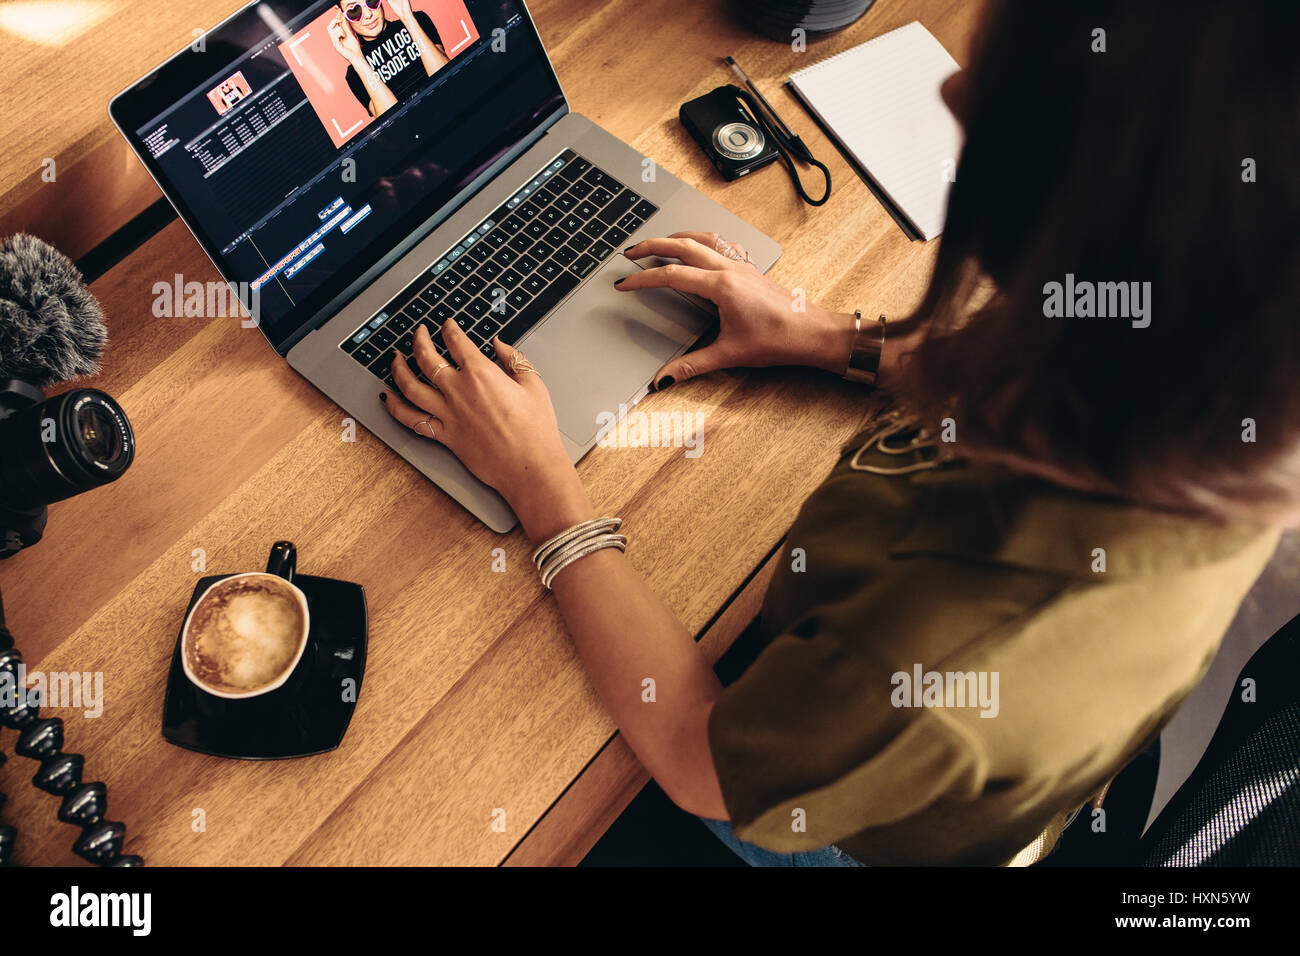 High angle view of female vlogger editing video on laptop. Young woman working on computer with coffee and cameras on table. Stock Photo